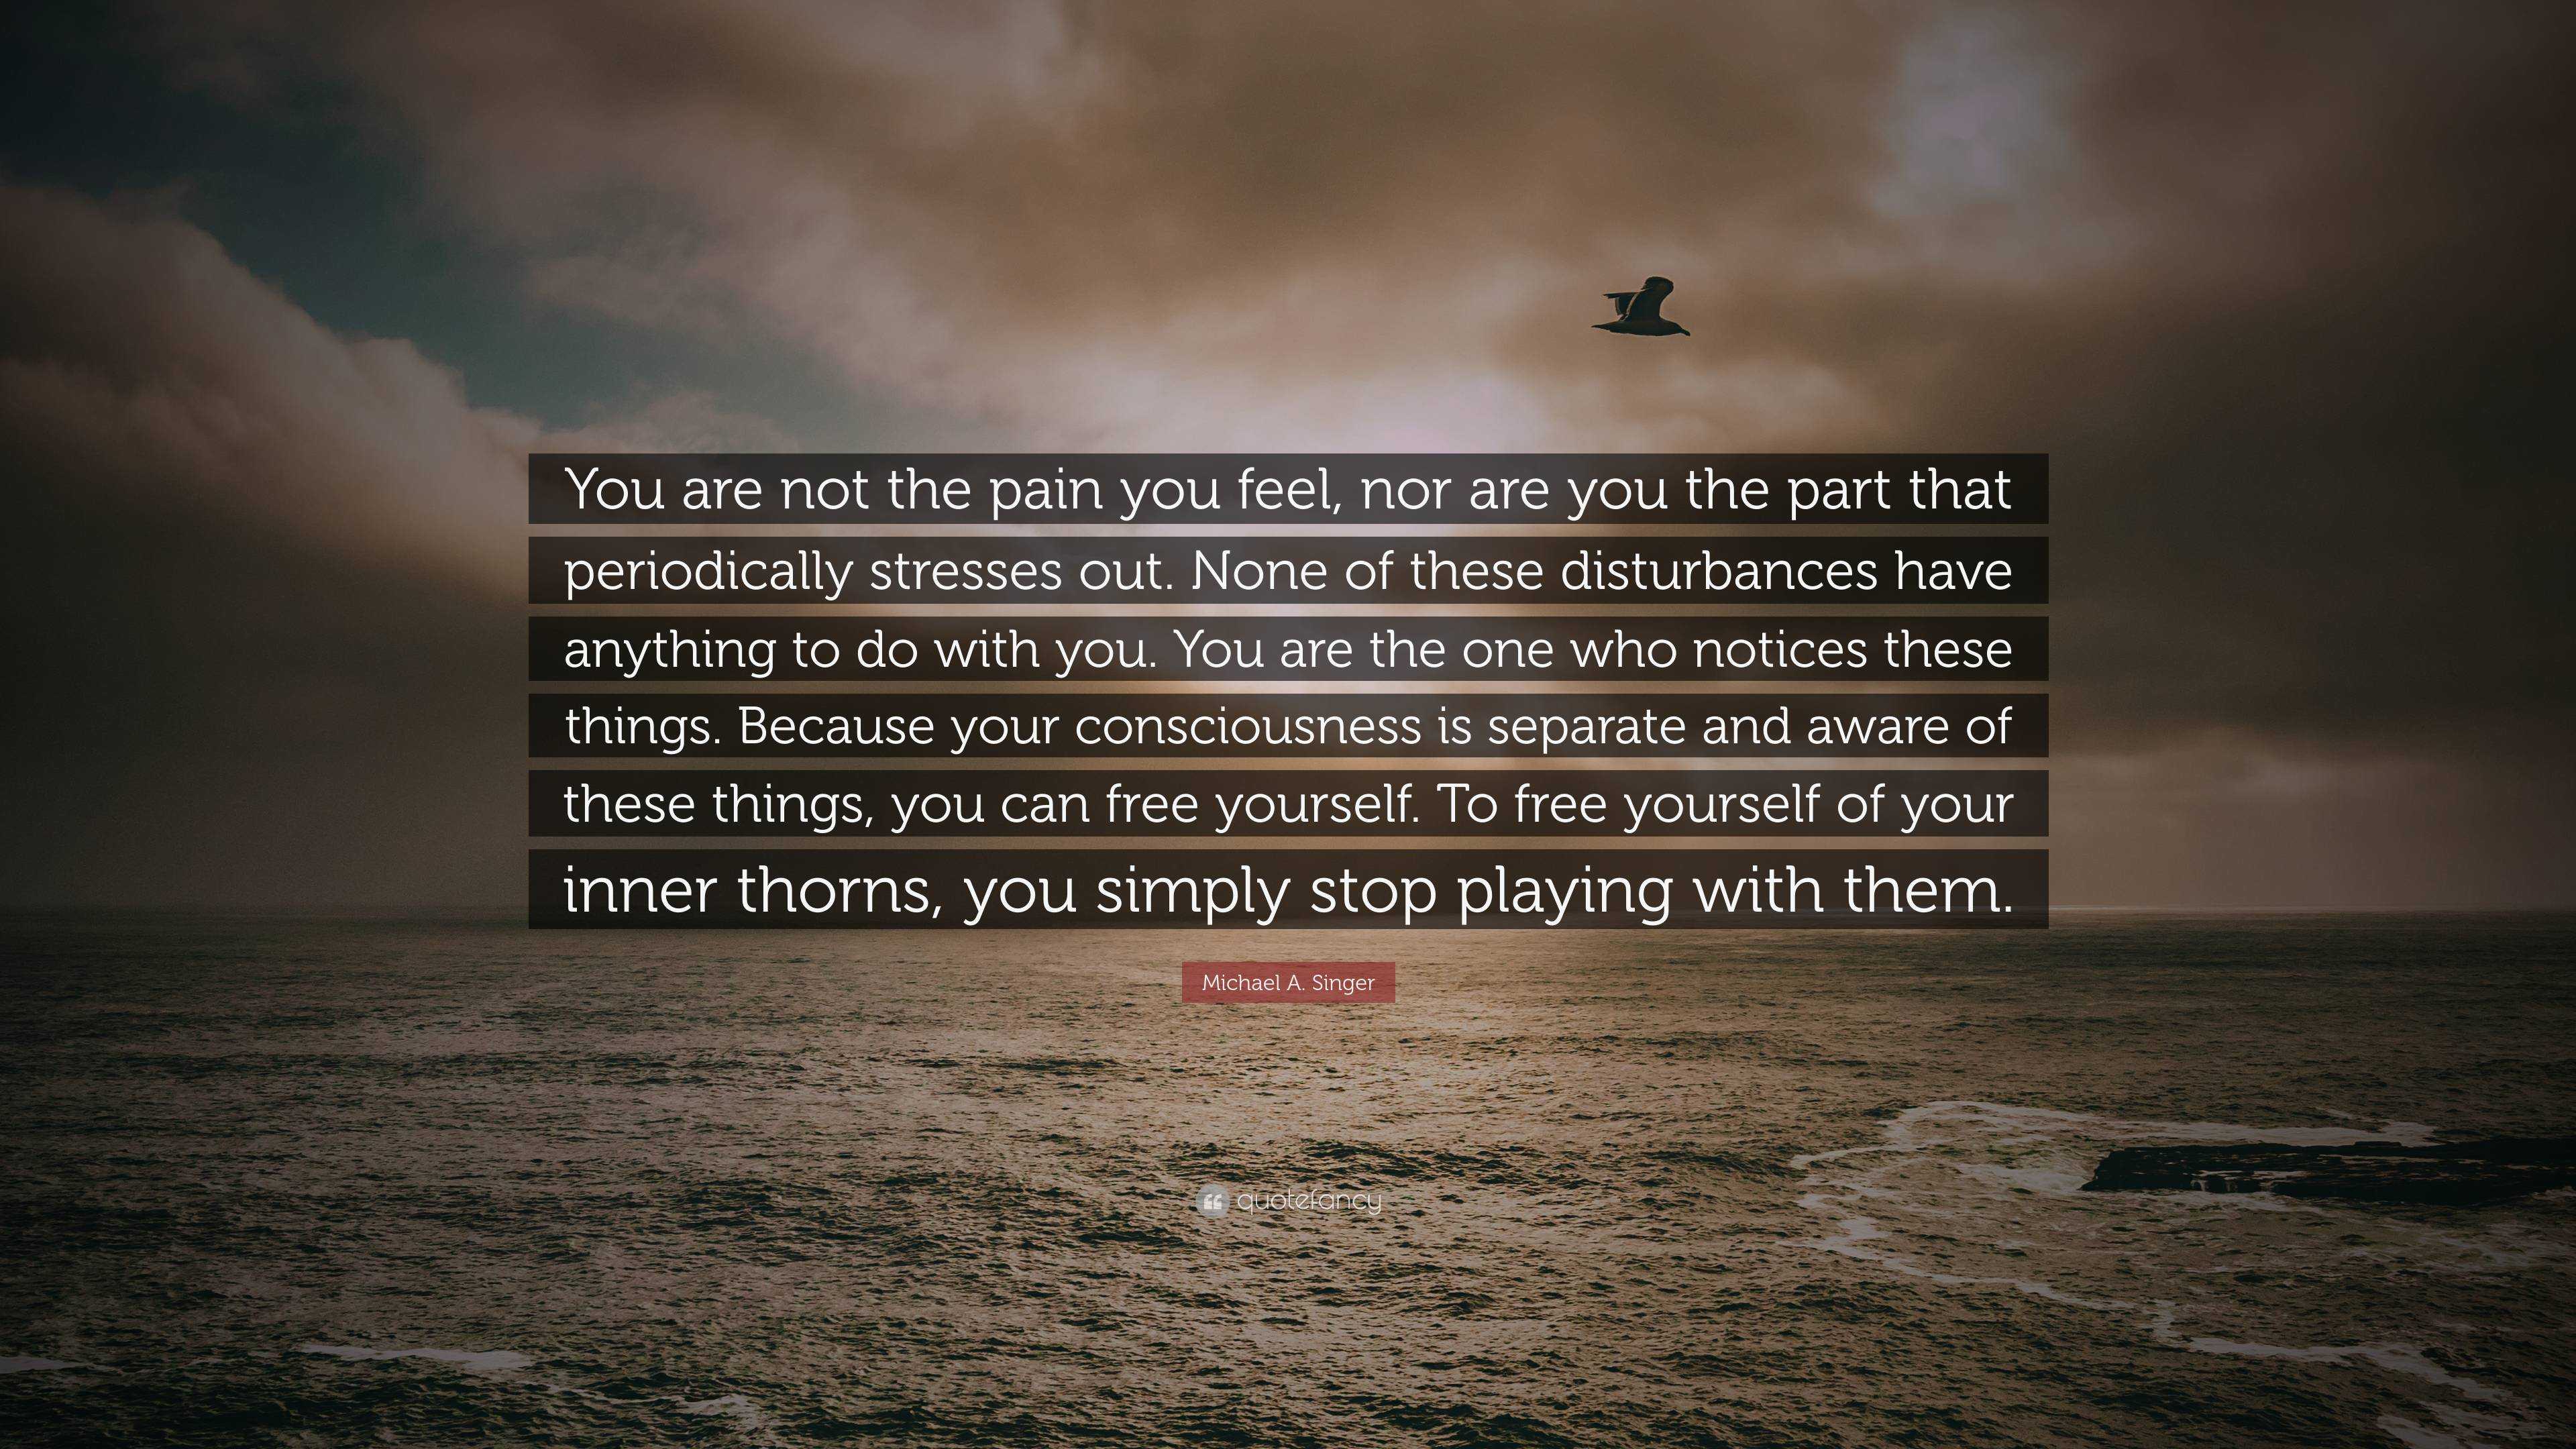 Michael A. Singer Quote: “You are not the pain you feel, nor are you ...